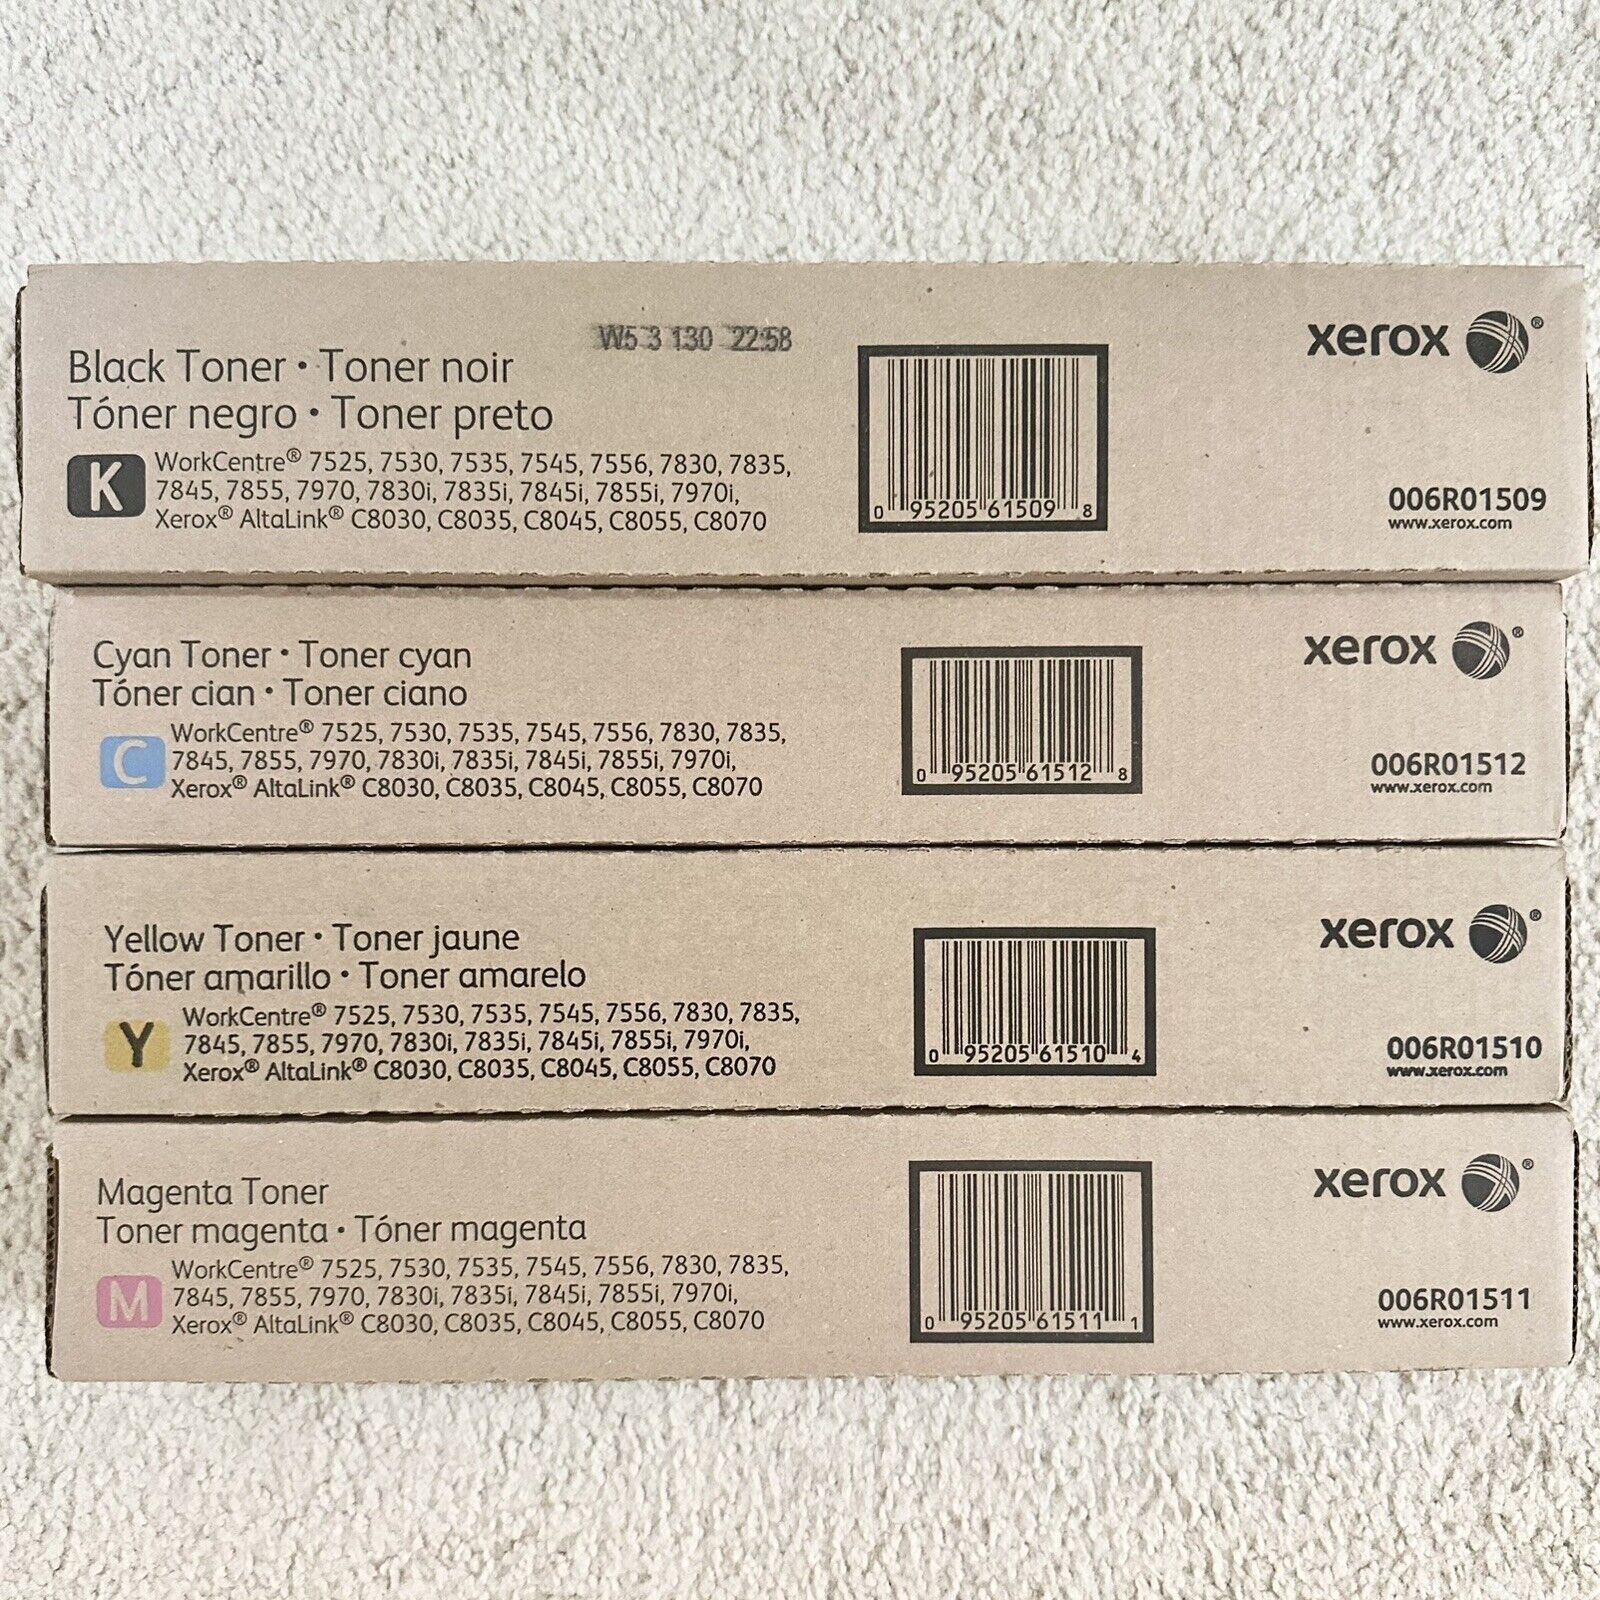 Xerox Toner Set CYMK for 7525 7530 7535 7545 7556 7830 7845 Authentic Sealed New